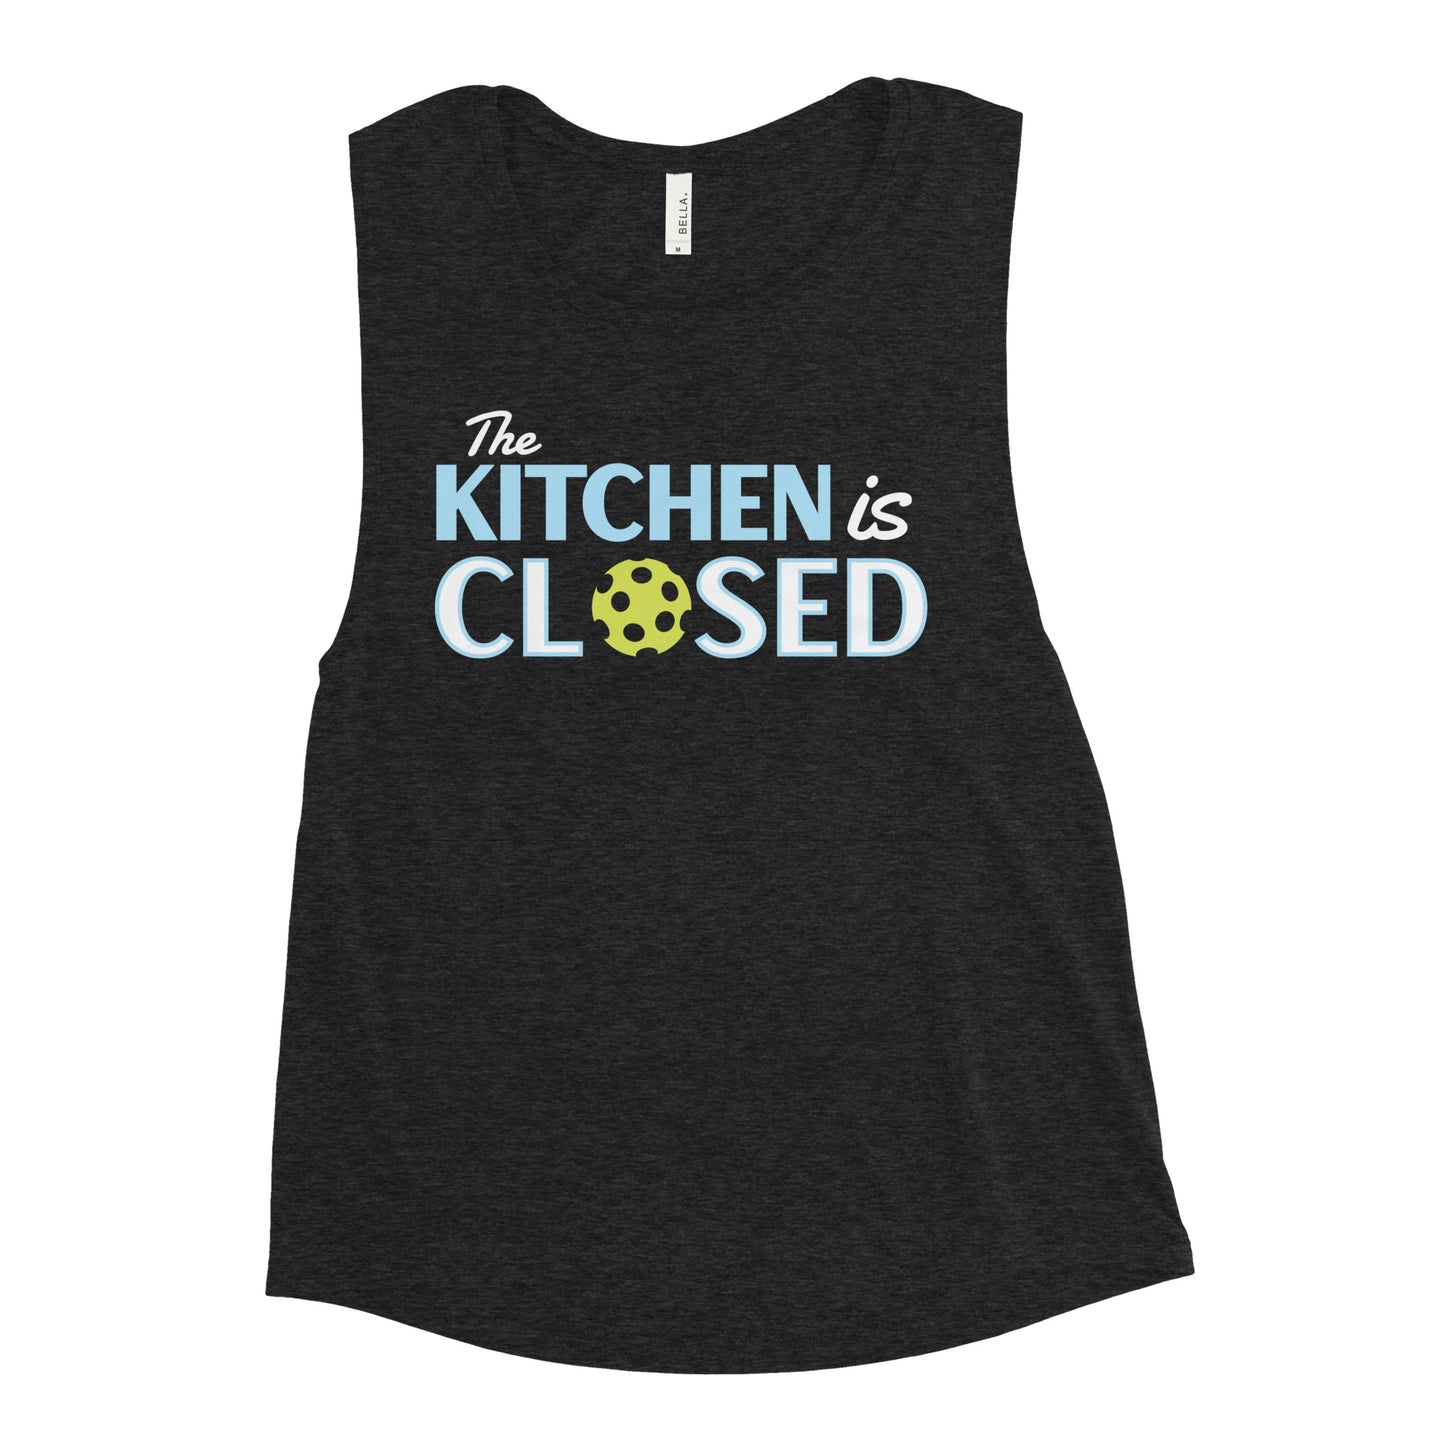 The Kitchen Is Closed Women's Muscle Tank